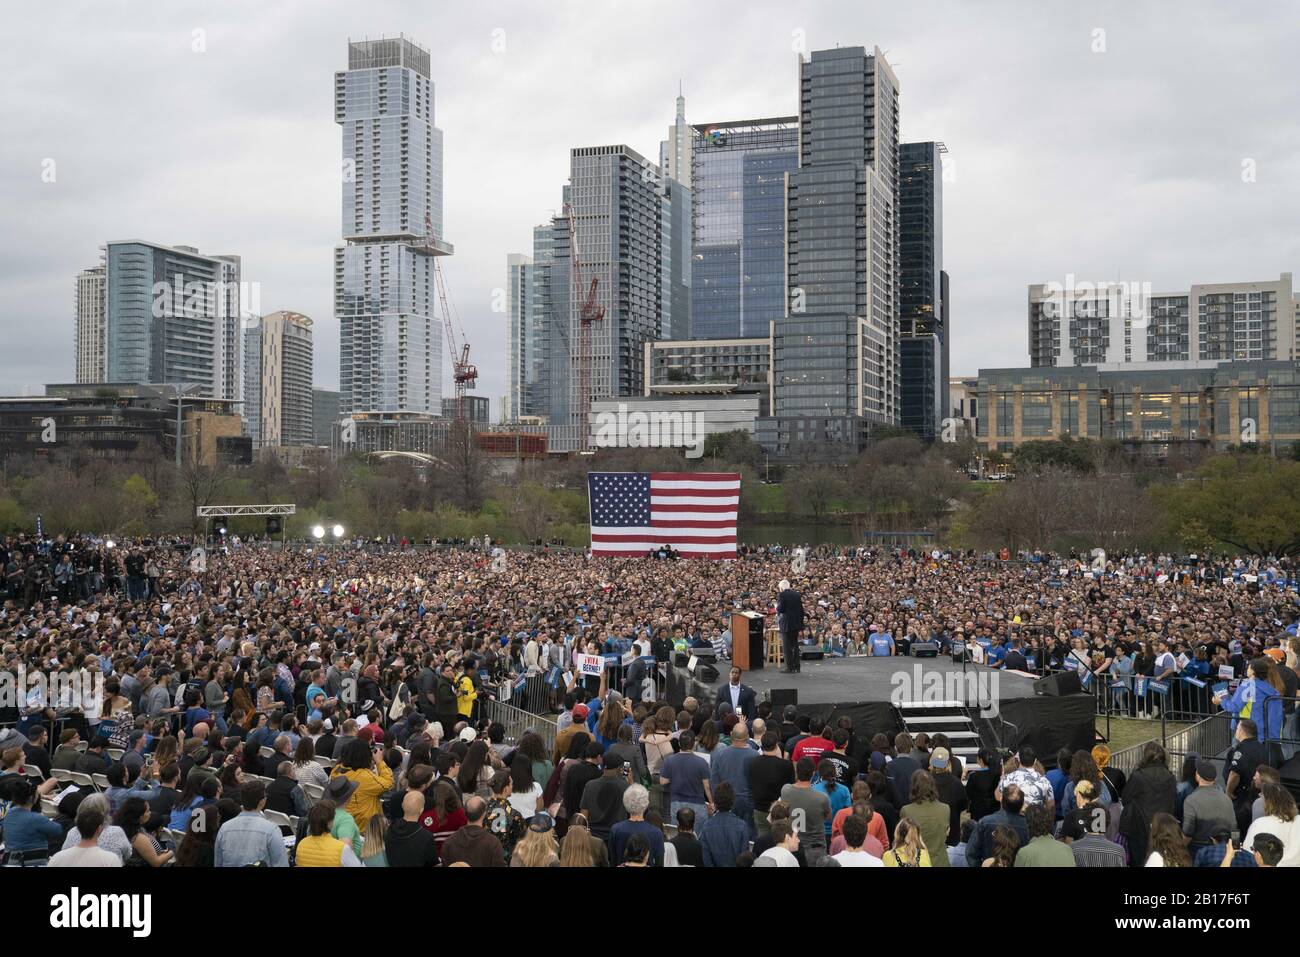 Austin, Texas, USA. 23rd Feb, 2020. Presidential candidate BERNIE SANDERS speaks to a crowd of 6,000 at the final event of a weekend swing through Texas after winning the Nevada caucuses on Saturday. Sanders is considered the front runner in the Democratic primary approaching Super Tuesday. Credit: Bob Daemmrich/ZUMA Wire/Alamy Live News Stock Photo